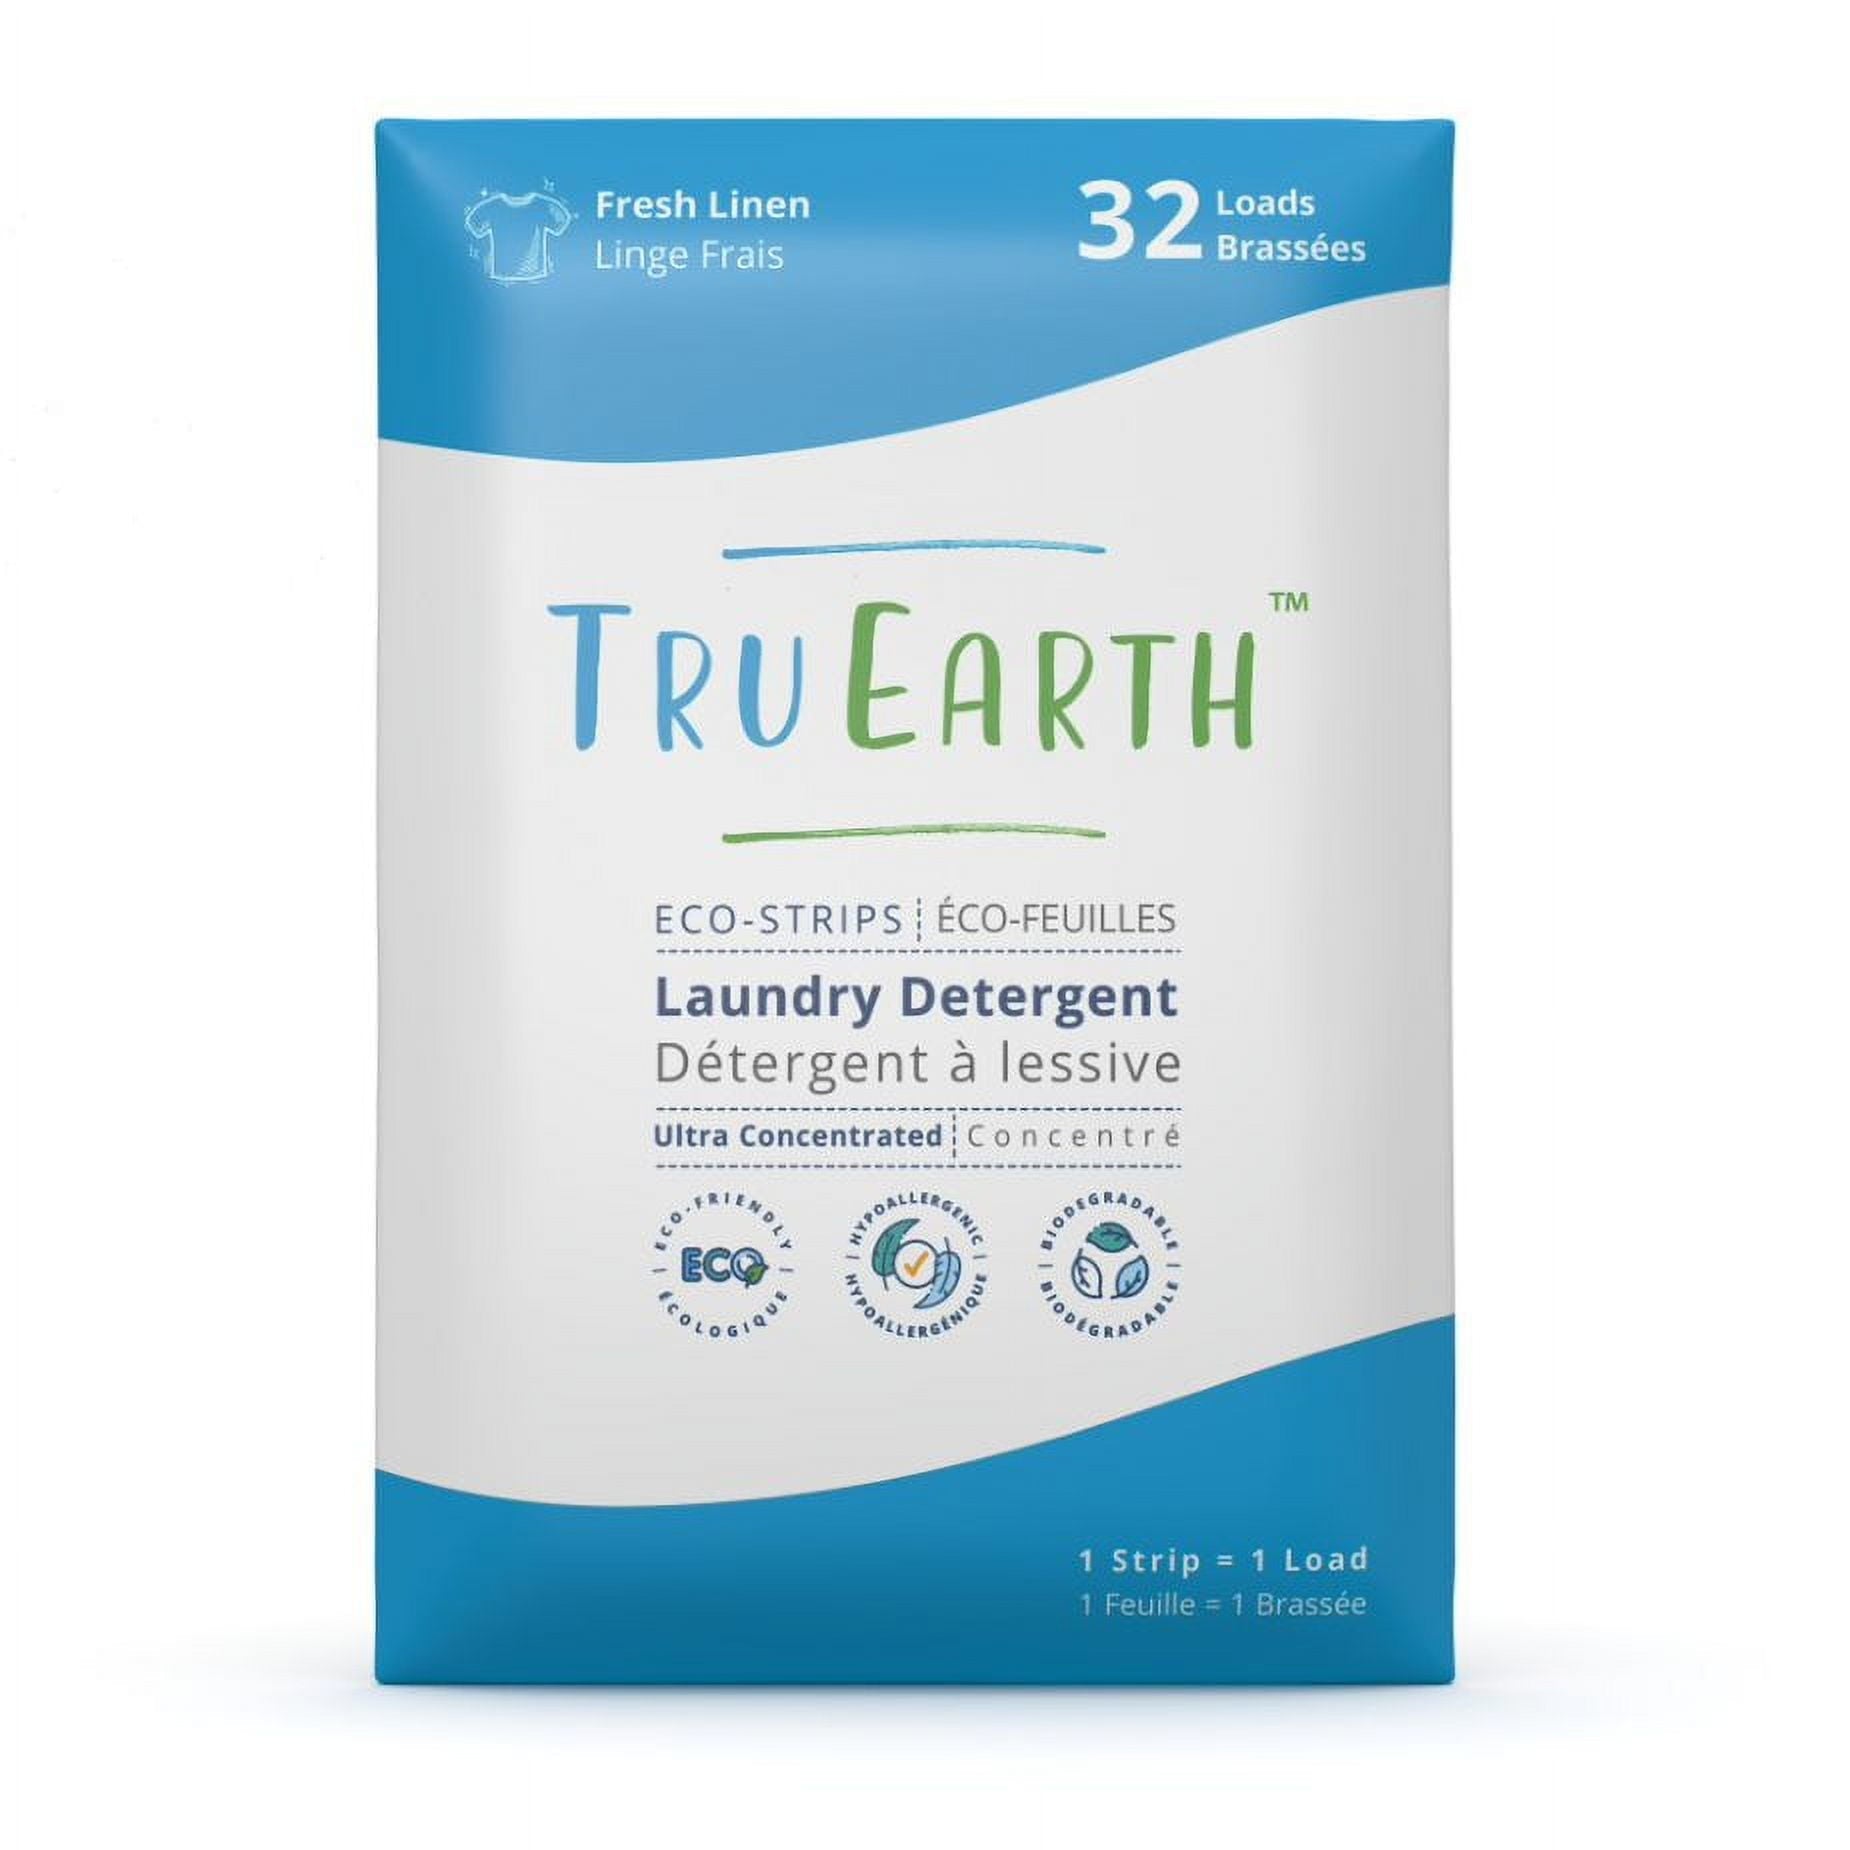 Tru Earth Eco strips Laundry Detergent